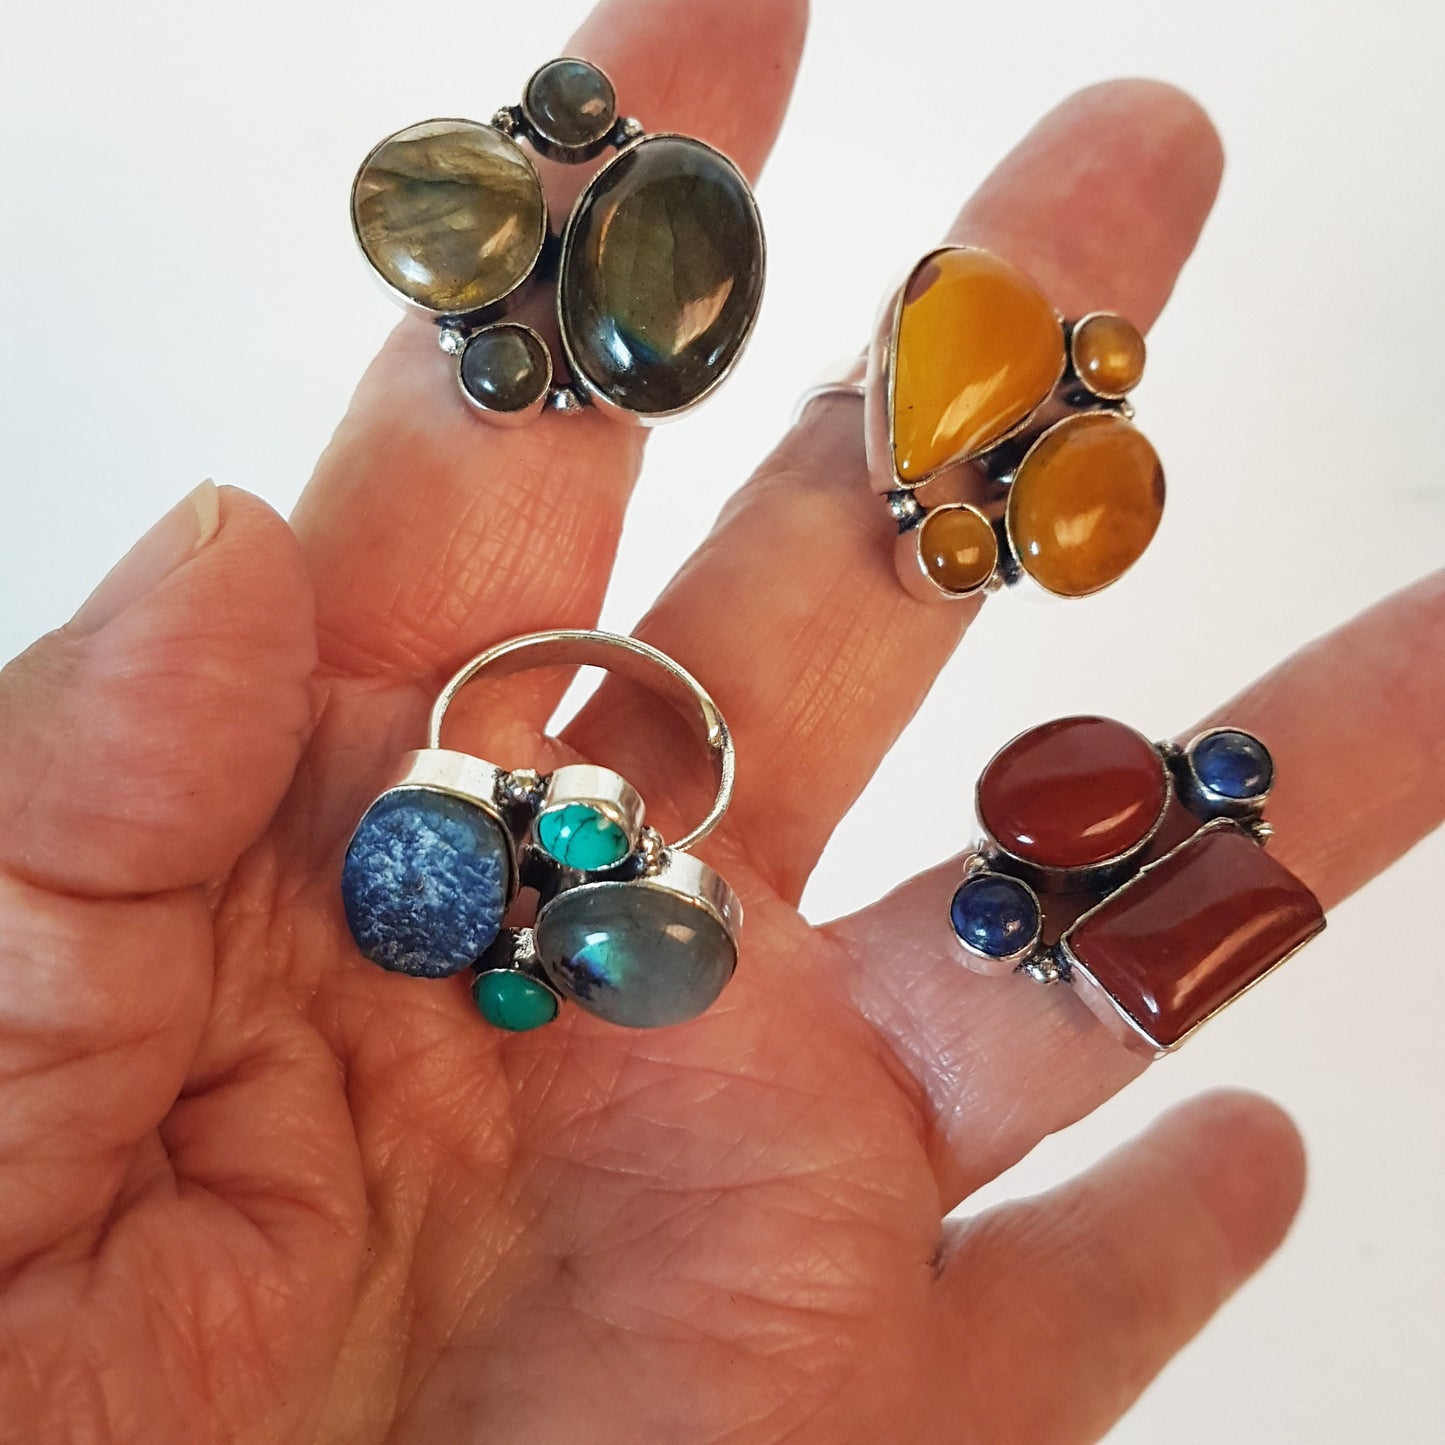 Gemstone Cluster Art Rings adjustable size. One of a kind rings with semi precious stones in asymetrical settings. Comfortable to wear. - Vintage India Ca